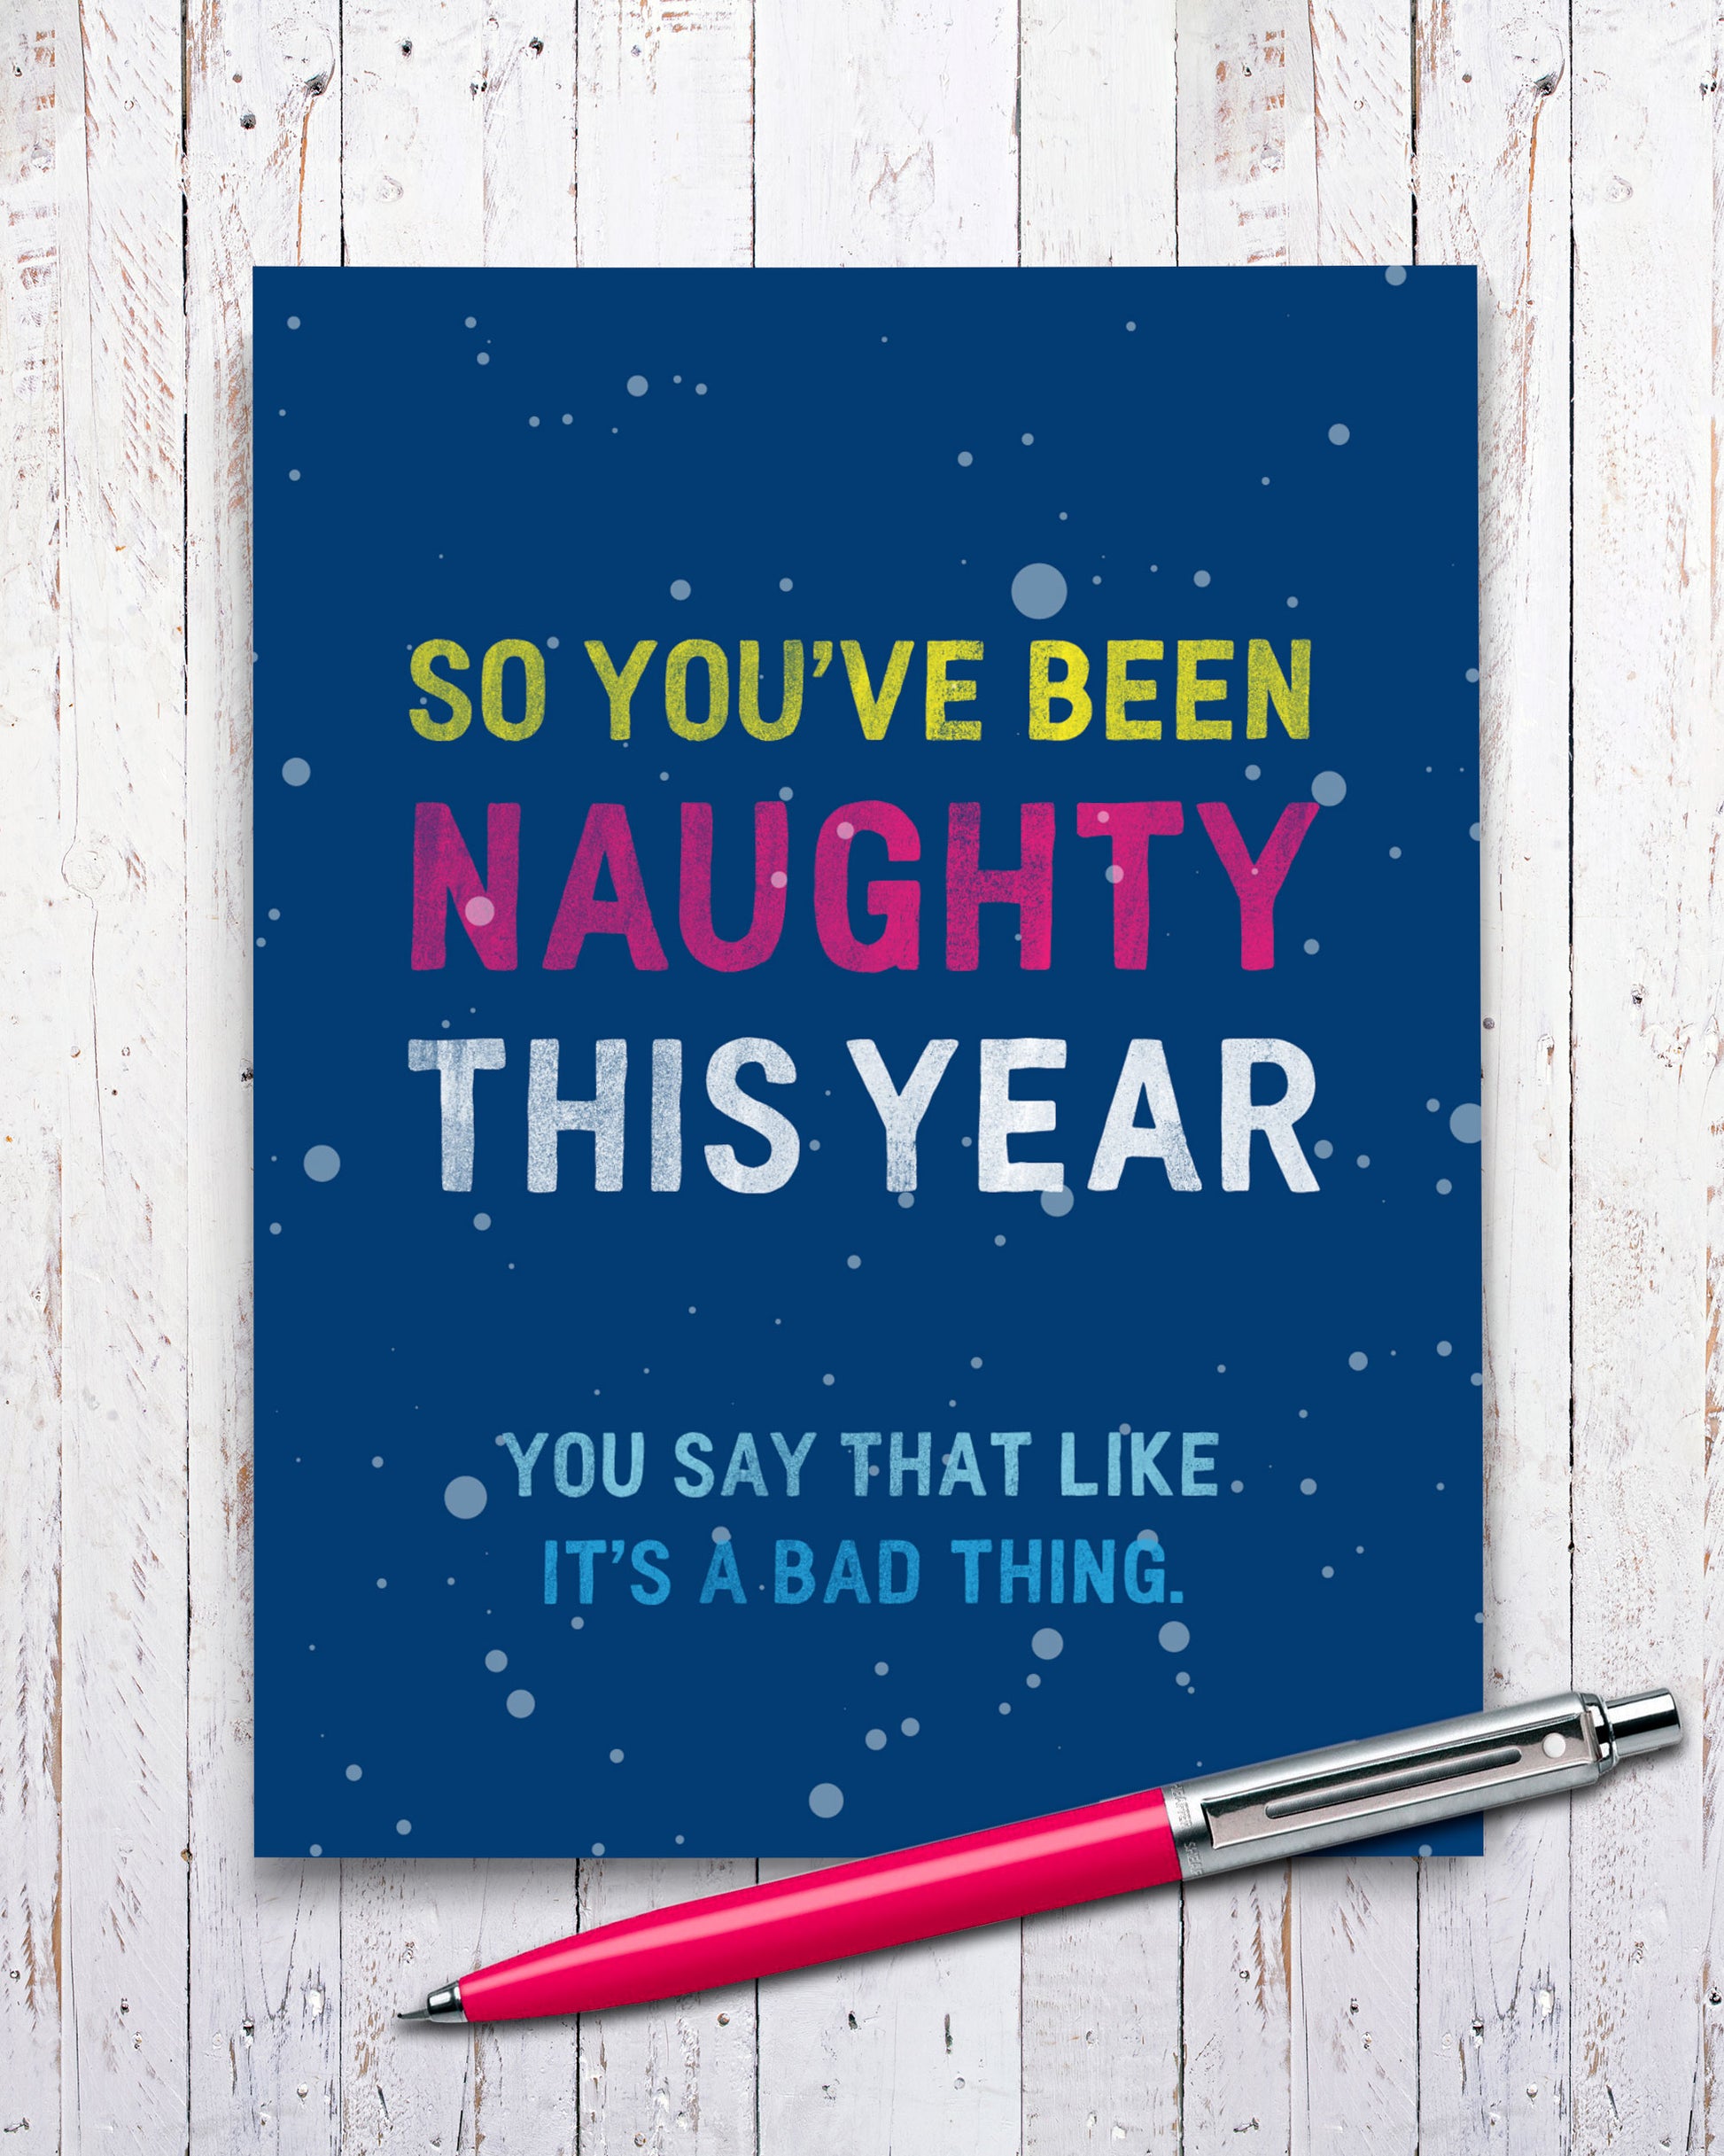 So You've Been Naughty Funny Christmas Card, funny holiday card.